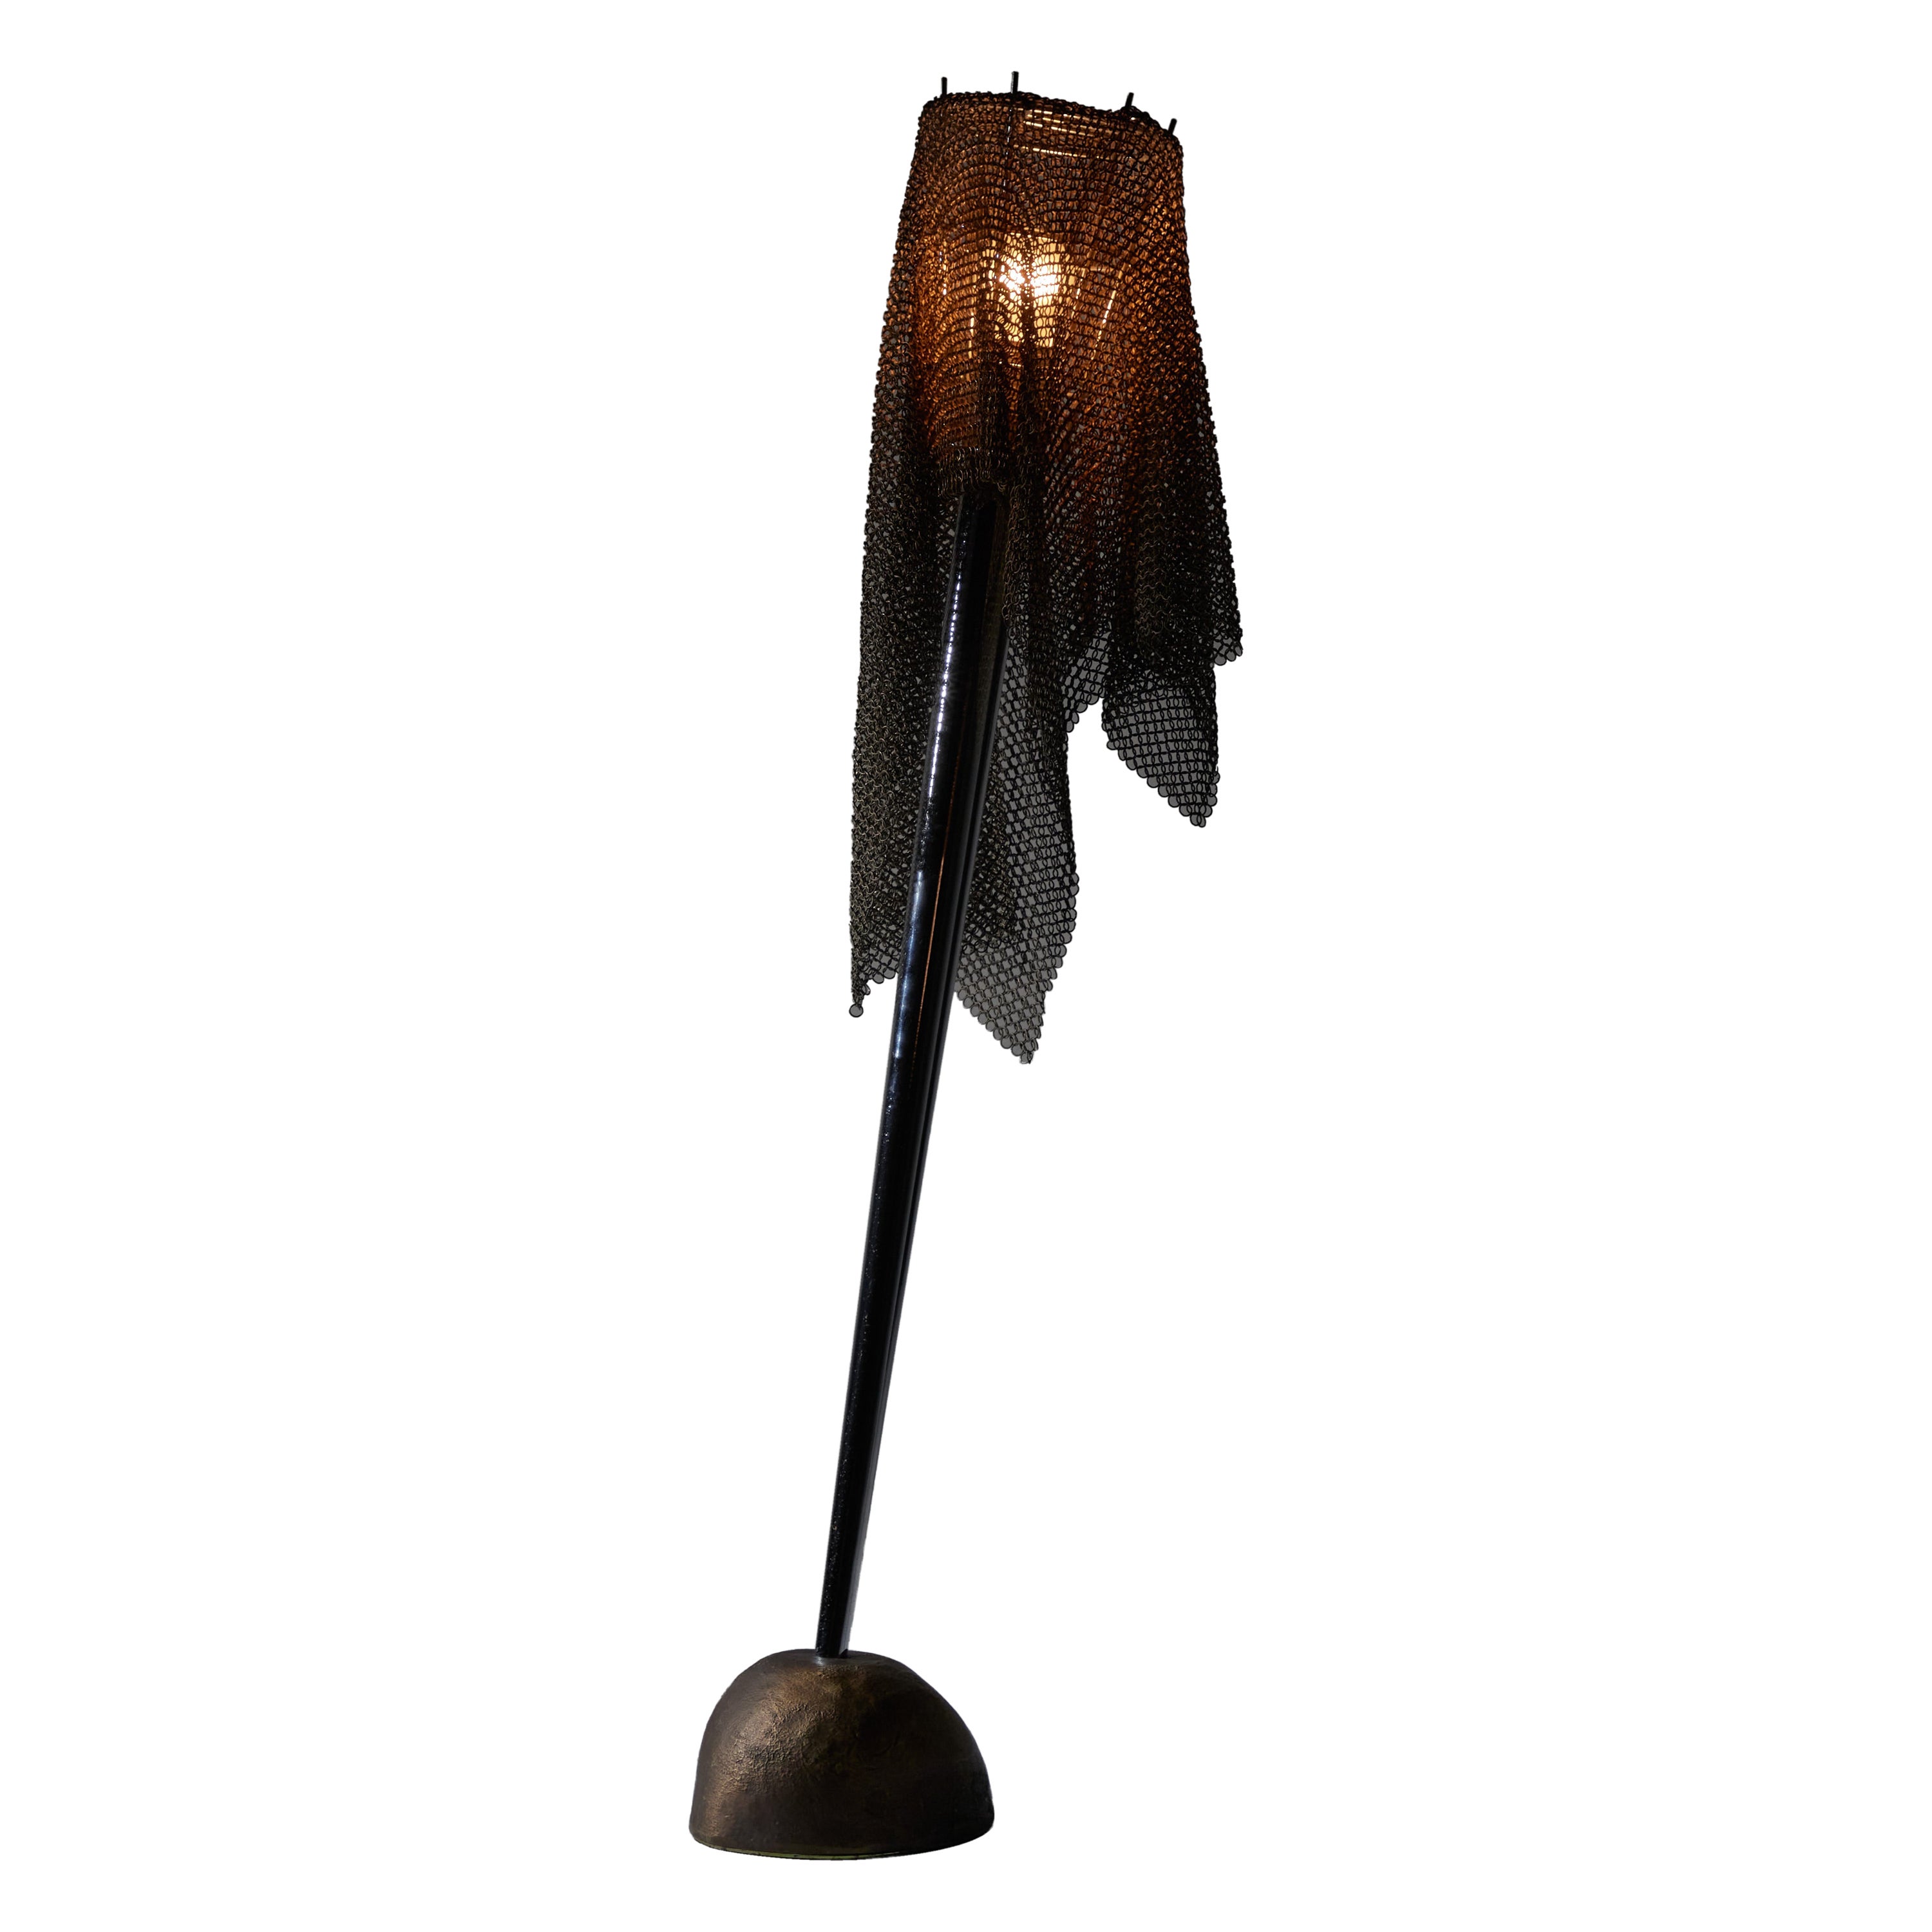 'Ecate' Table Lamp by Toni Cordero for Artemide For Sale